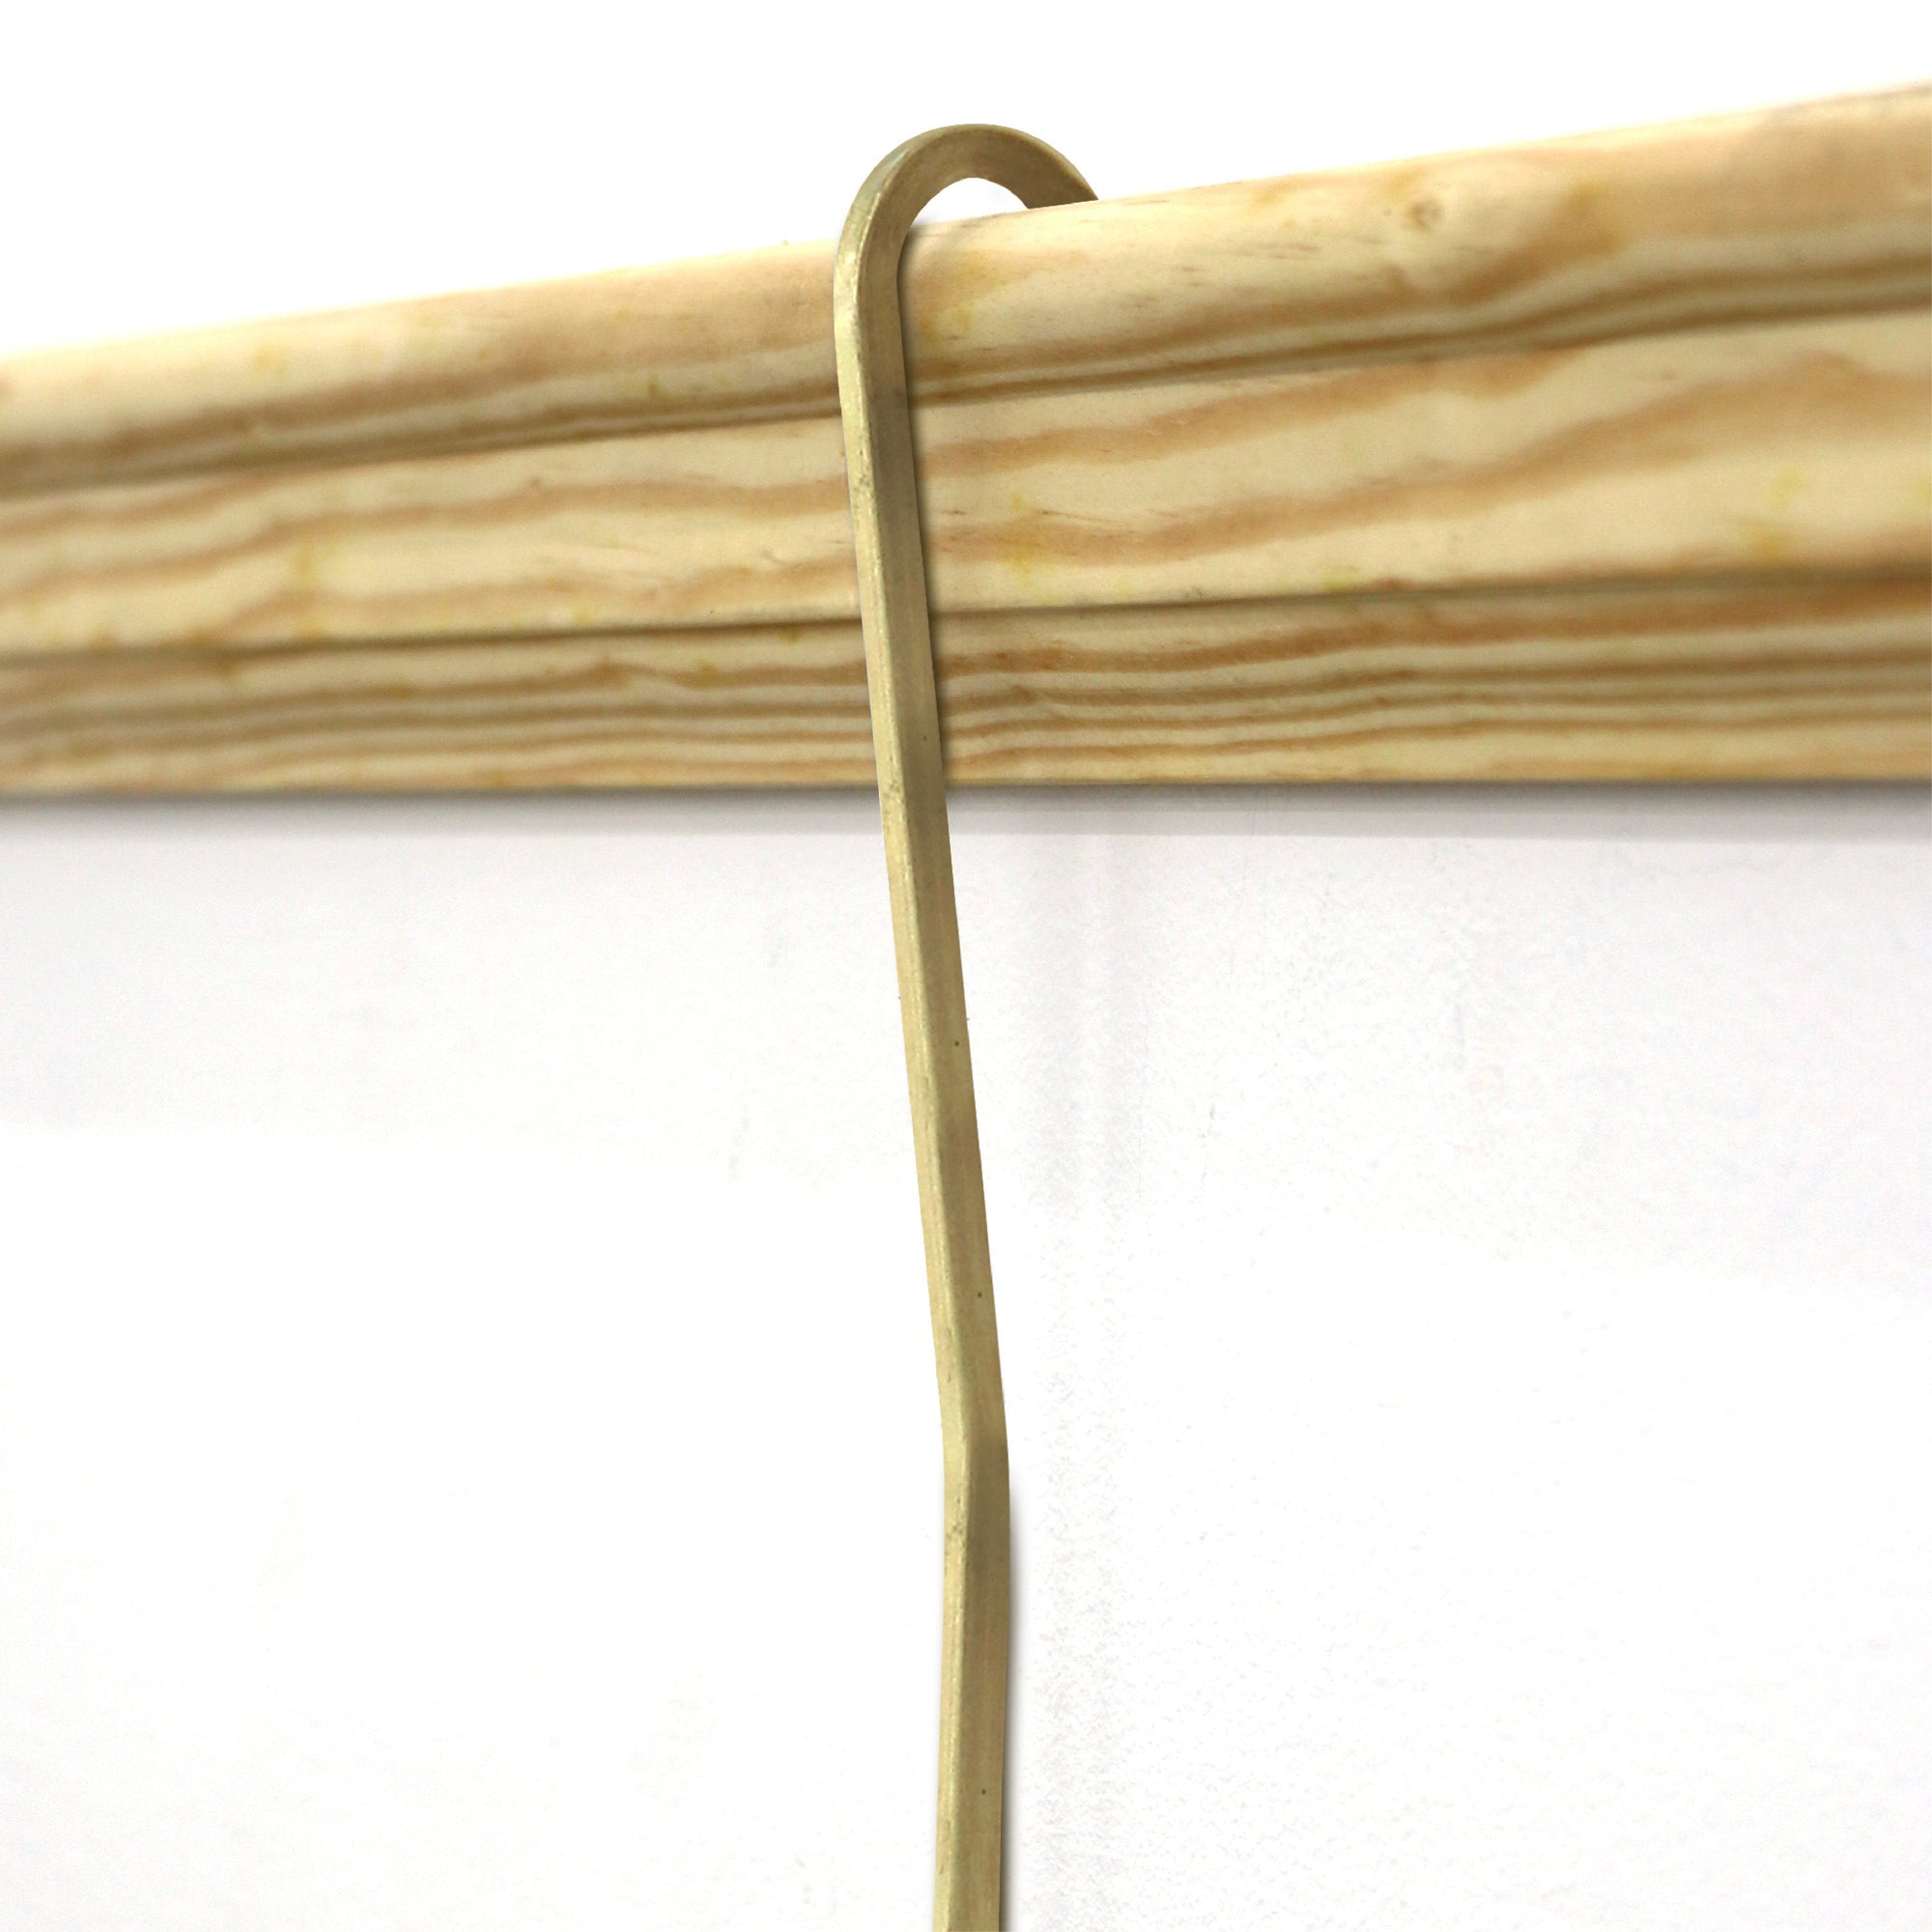 Brass Gallery Rod for Picture Rail Molding - 5 foot Rod for